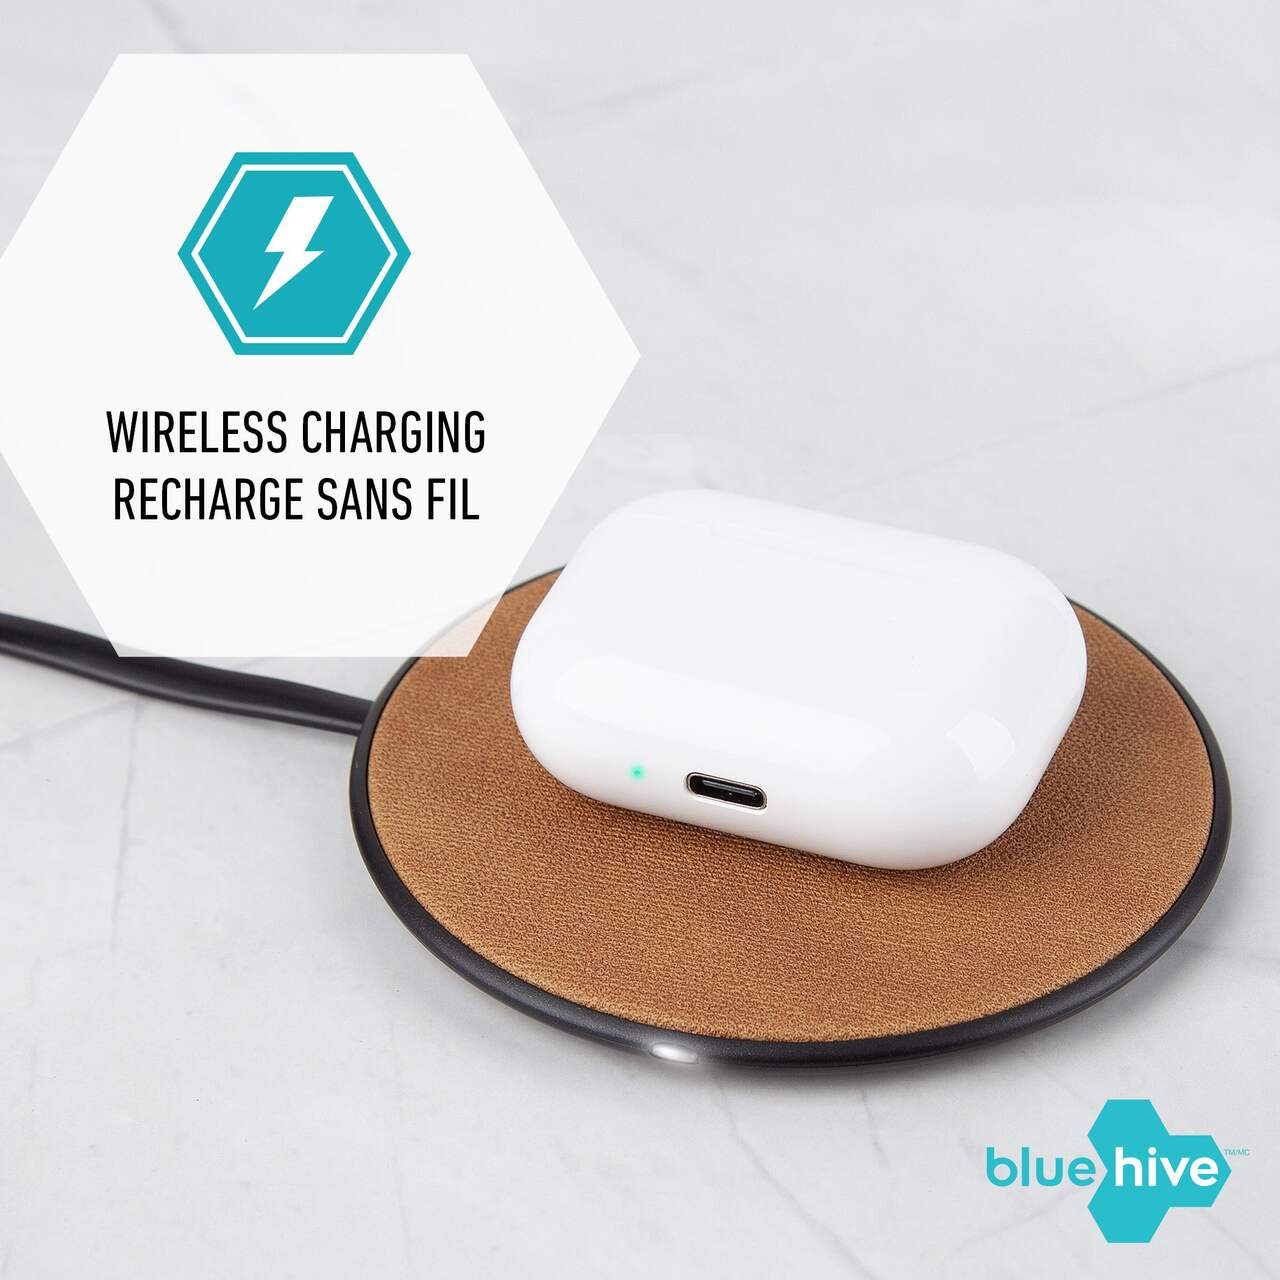 Bluehive Bluepods+ Wireless Charging Earbuds with 27.5 Hour